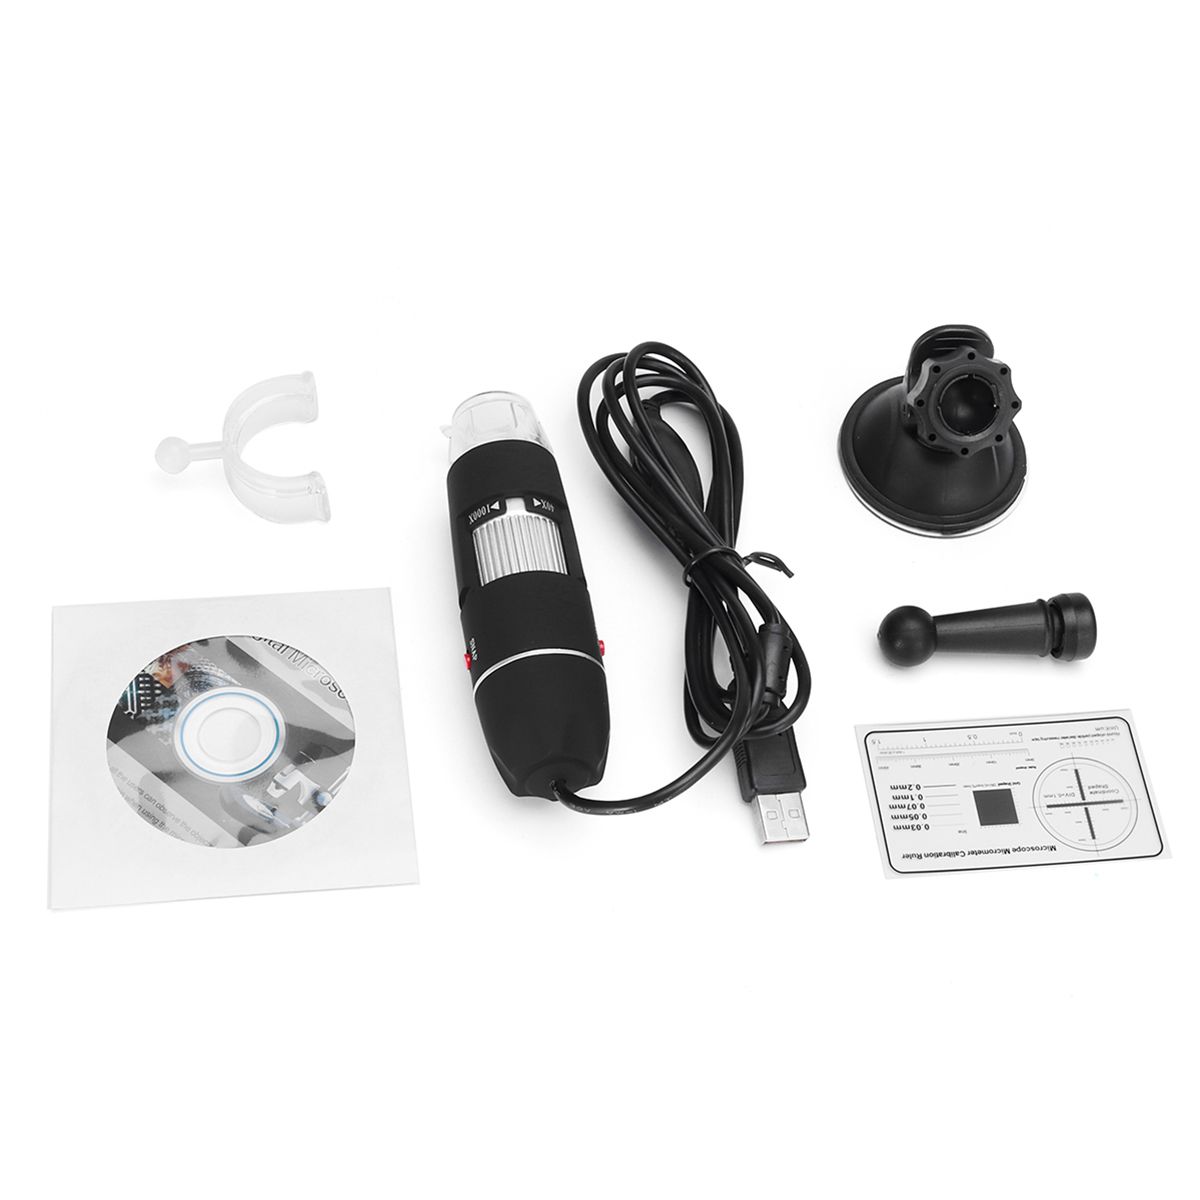 1000X-8-LED-USB-Digital-Microscope-Borescope-Video-Camera-Magnifier-with-Stand-1318889